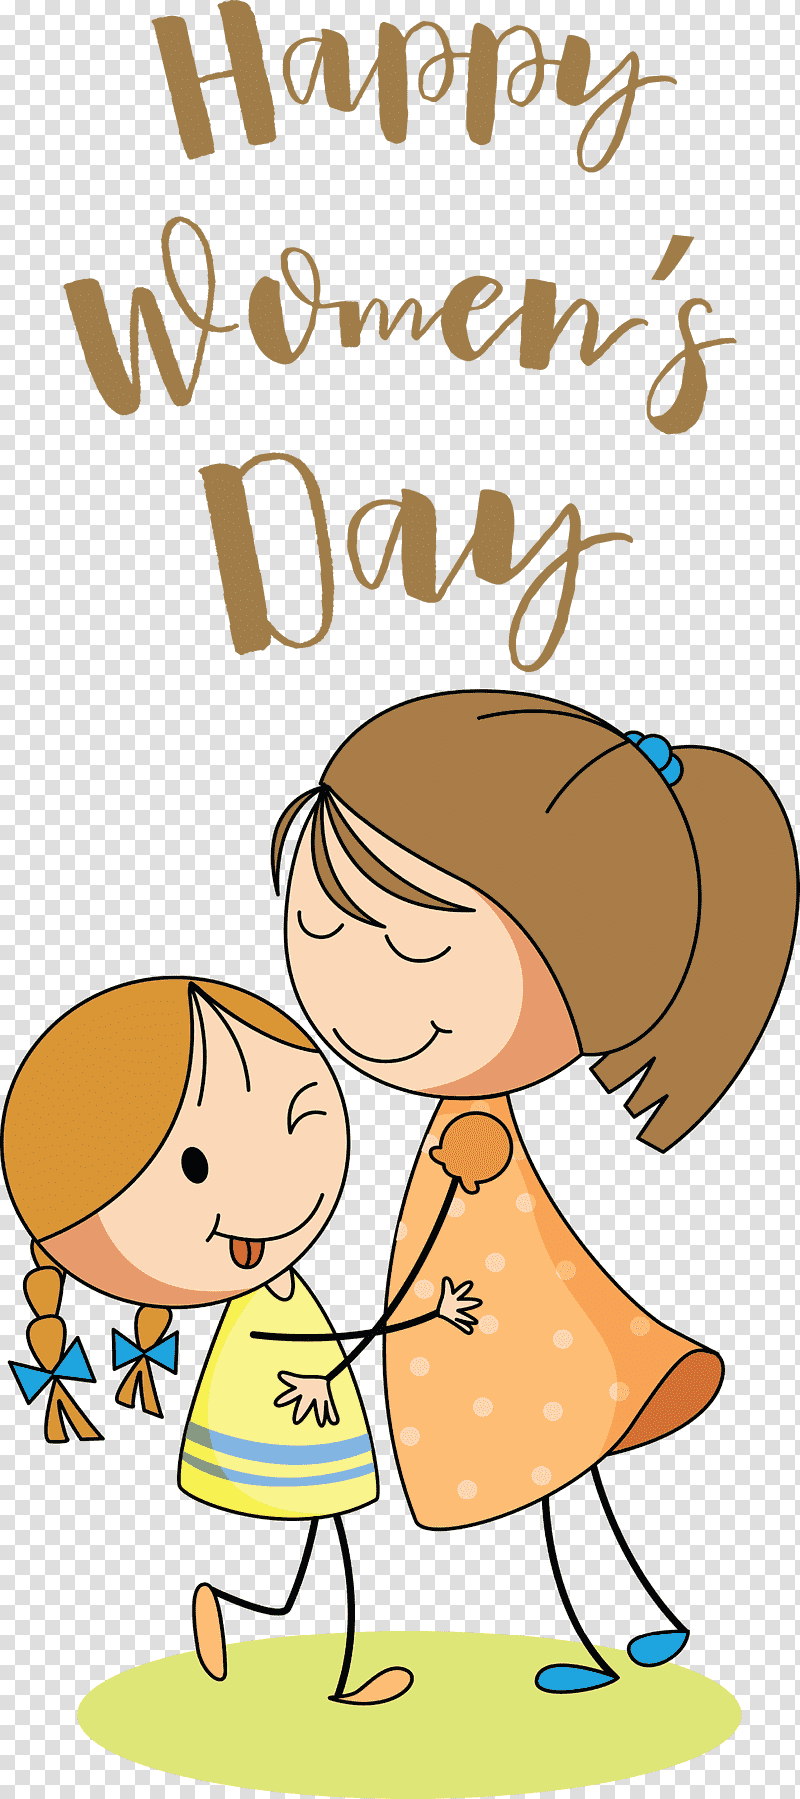 Happy Womens Day Womens Day, Royaltyfree, Hug, Big, Cartoon transparent background PNG clipart